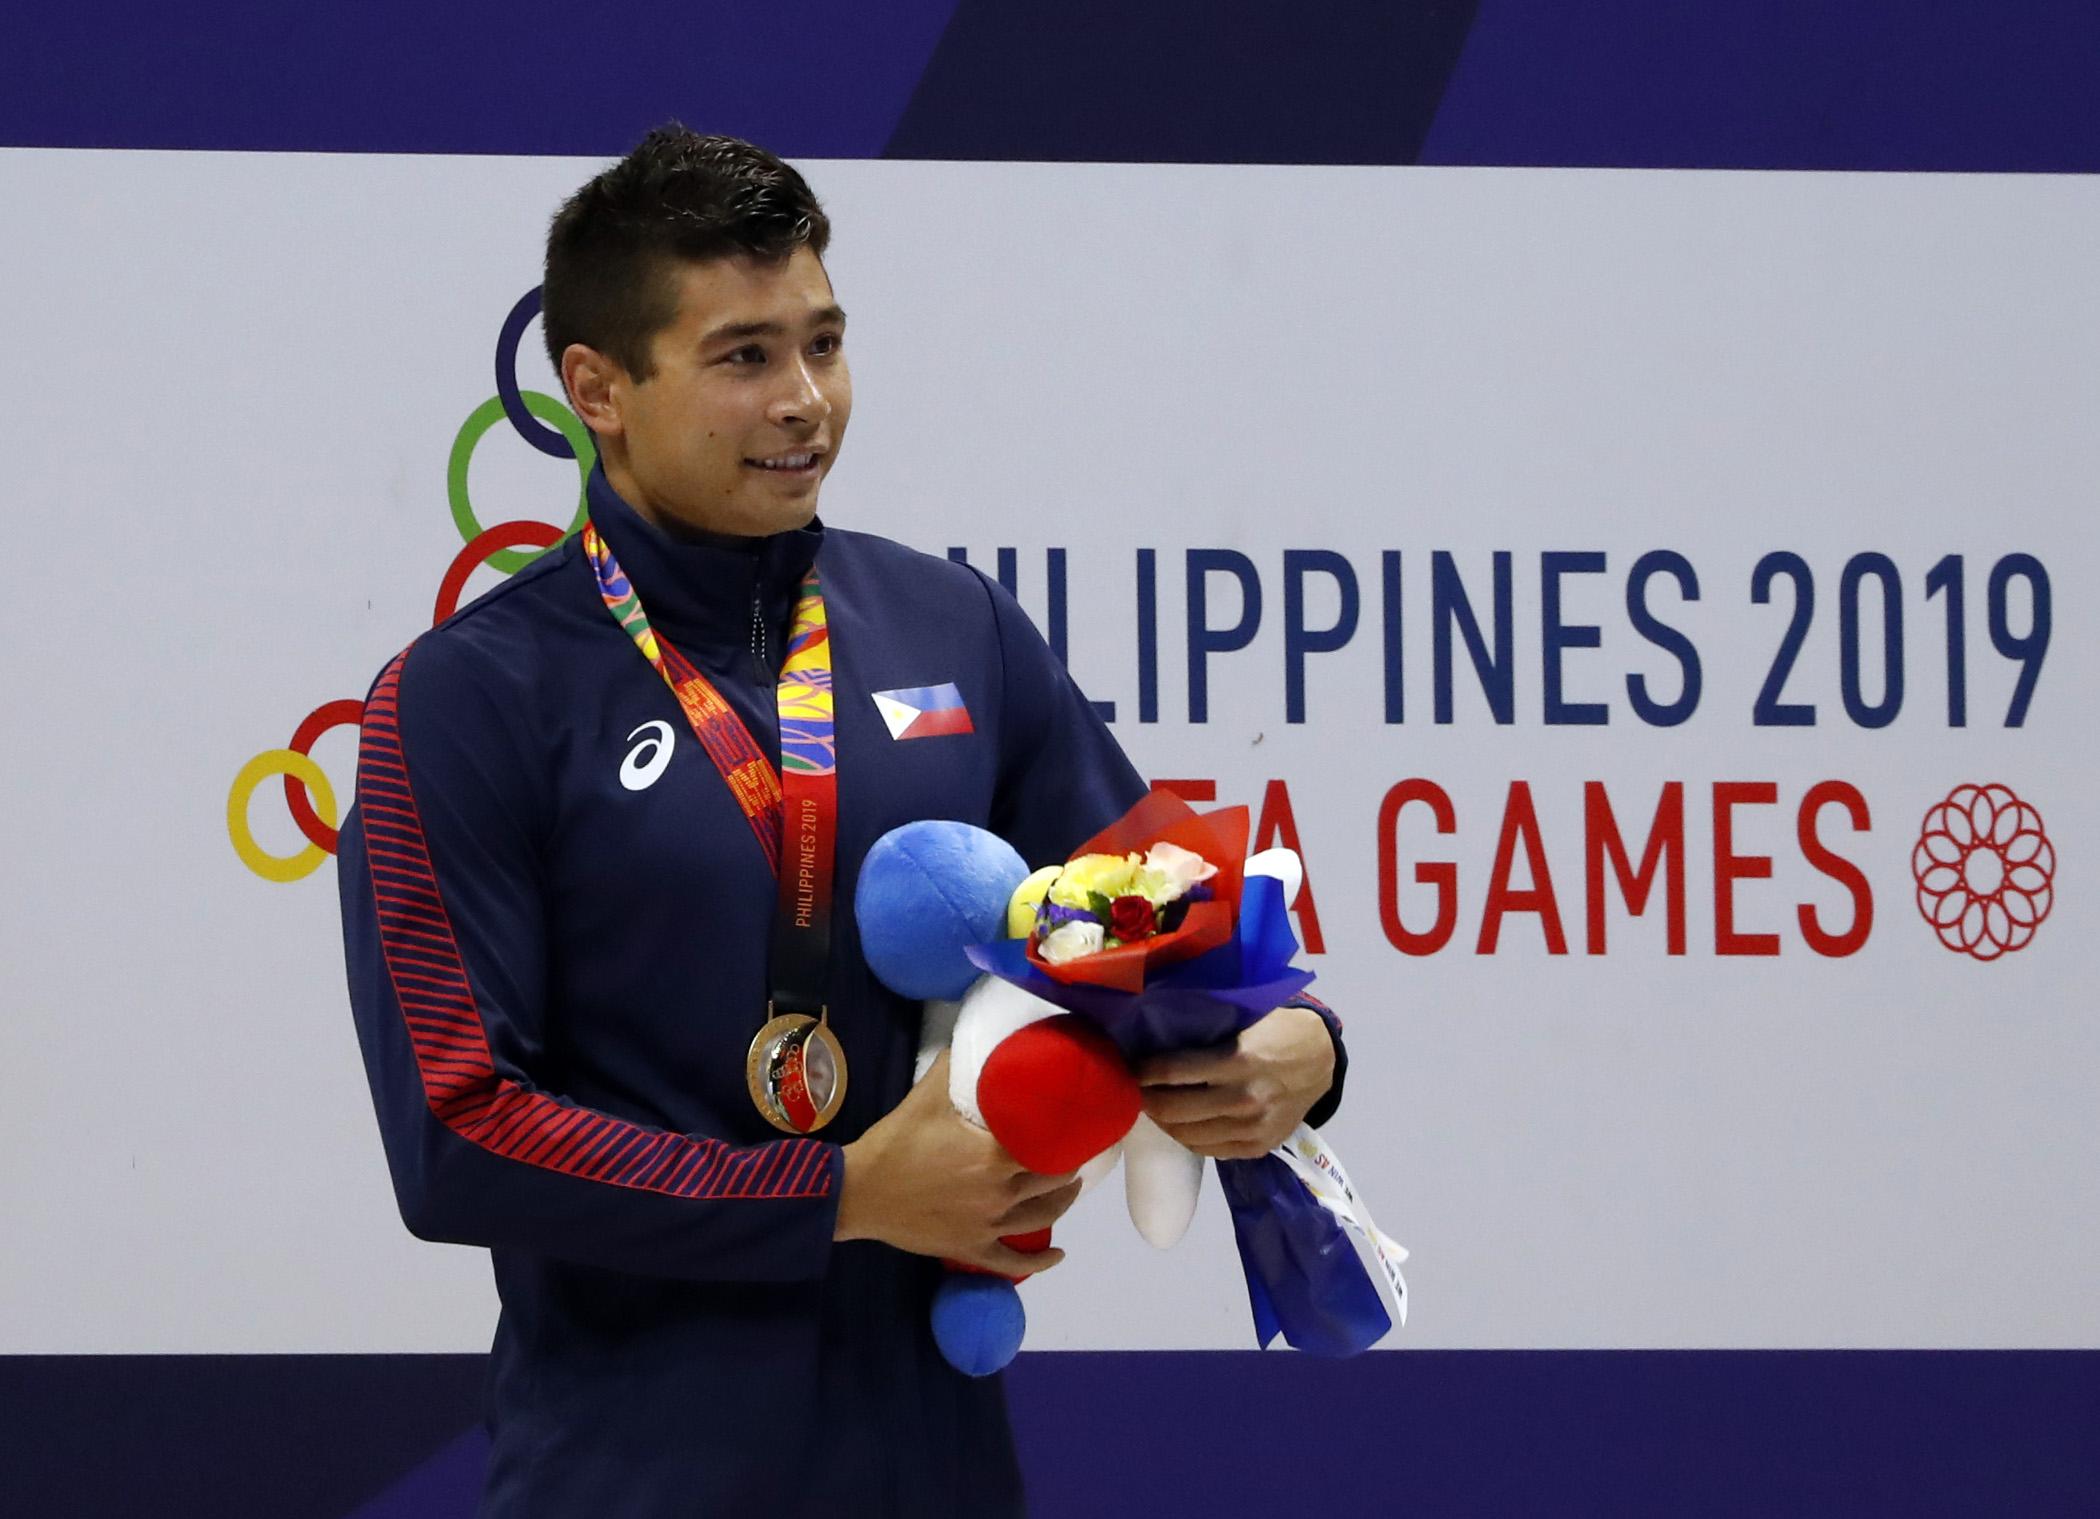 James Deiparine won the Philippines' first SEA Games swimming gold in 10 years. Zeke Alonzo